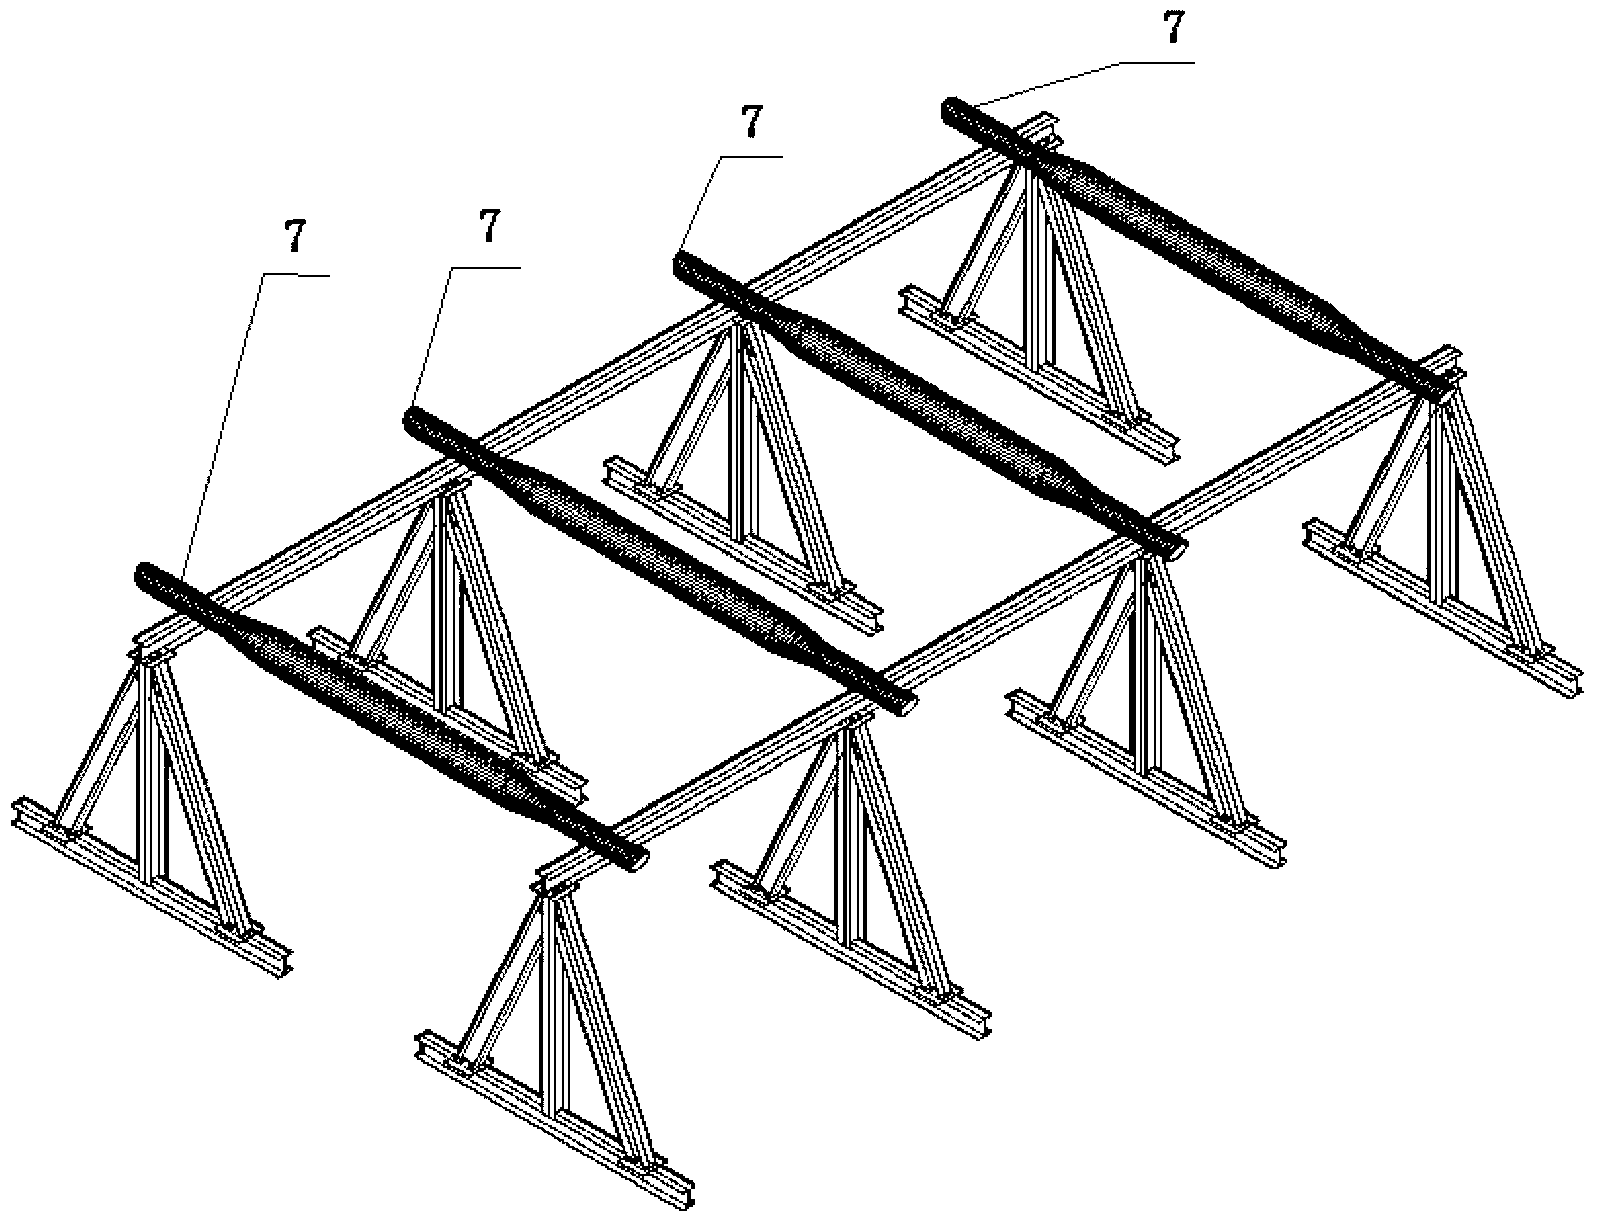 Detachable triangular scaffold and steel truss assembly construction method